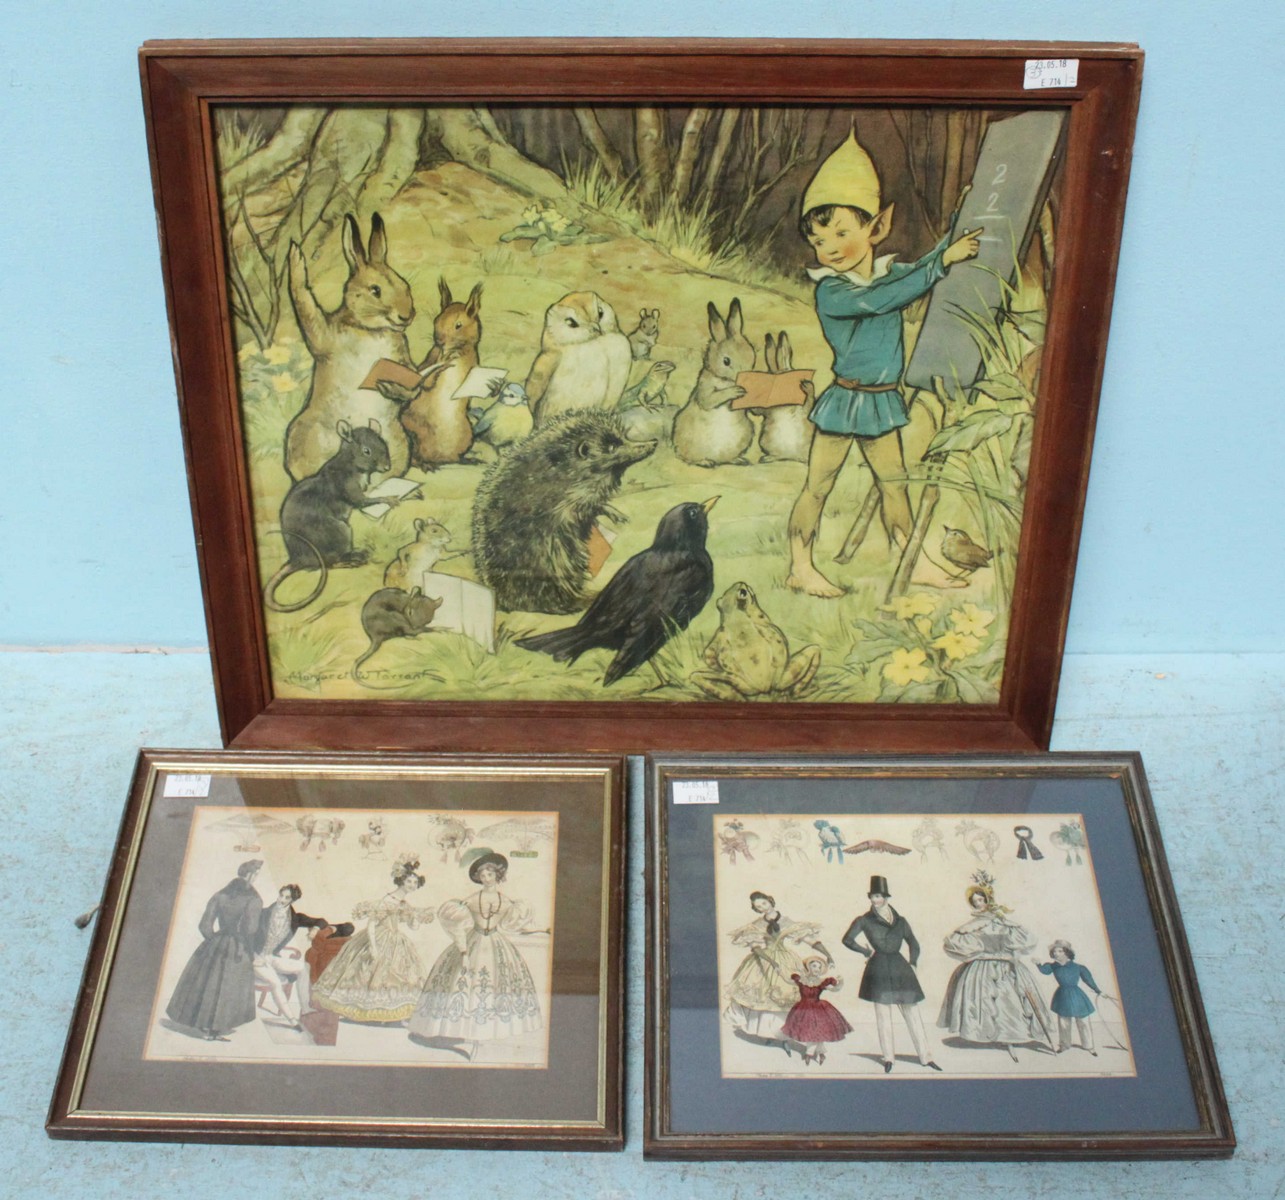 After Margaret W. Tarrant, Pixie giving maths lesson to forest animals, colour print in pitch pine